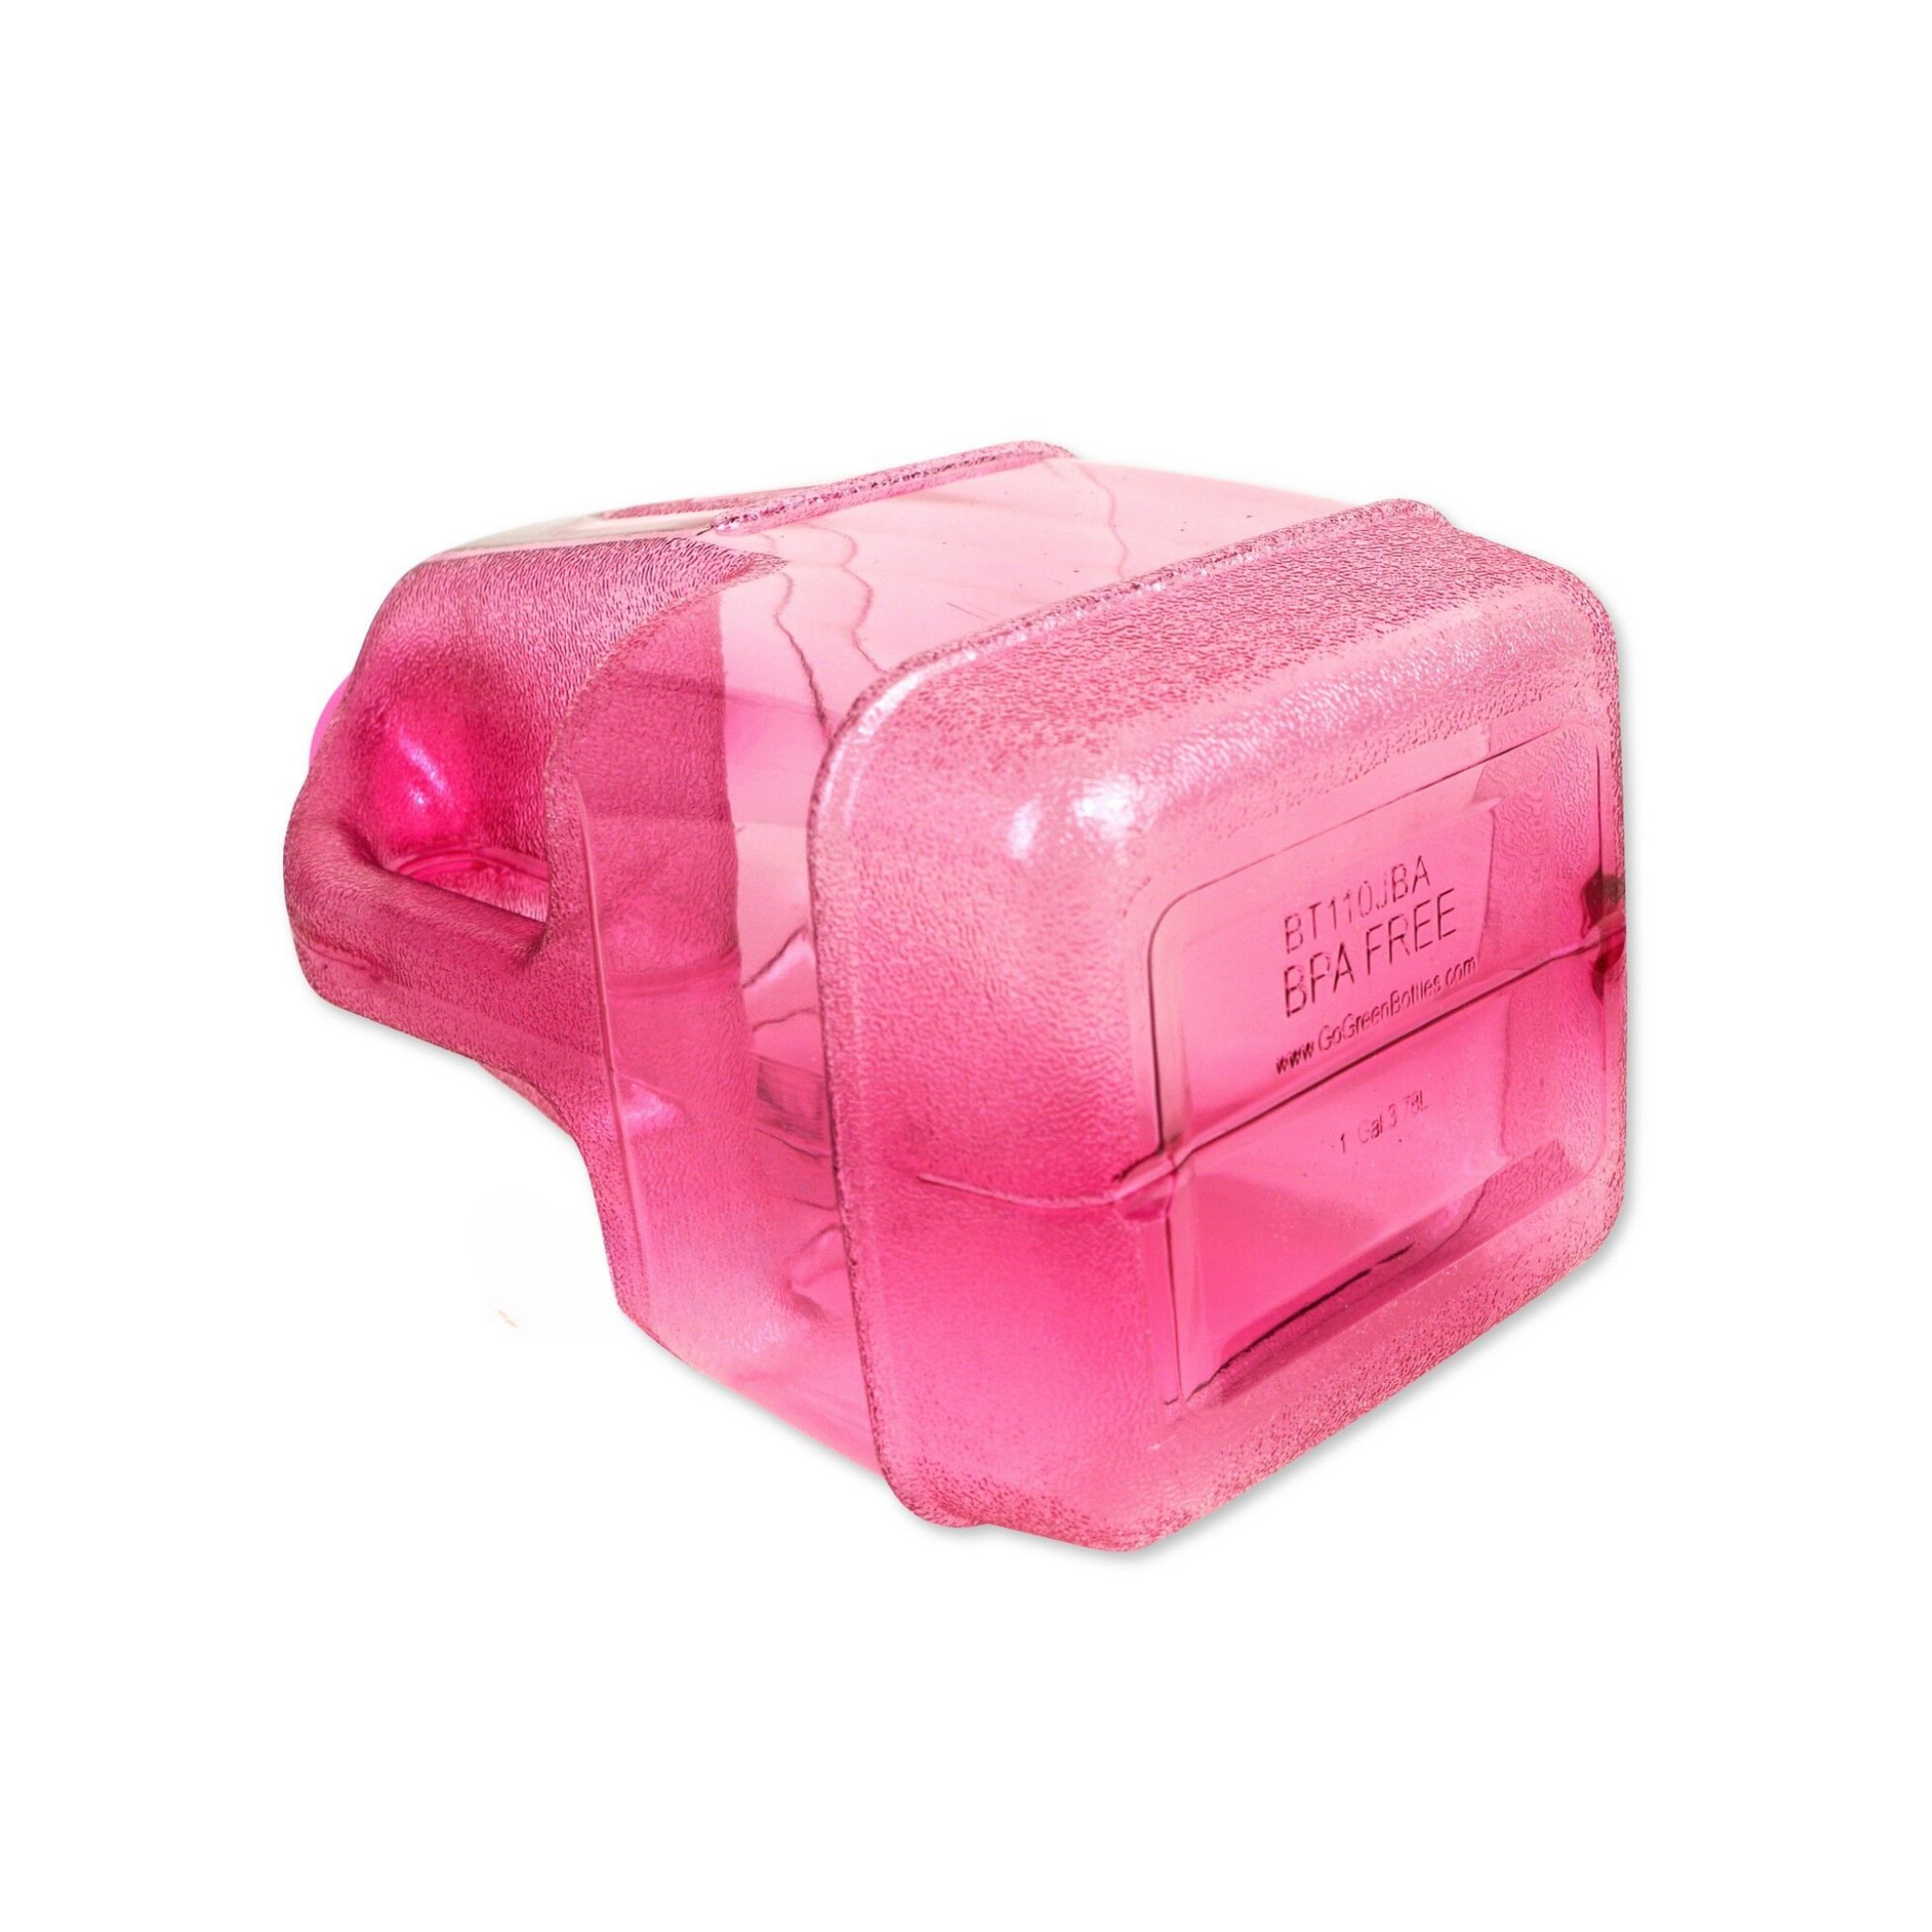 1-gallon pink plastic jug for water storage and dispensing, made with BPA-free materials